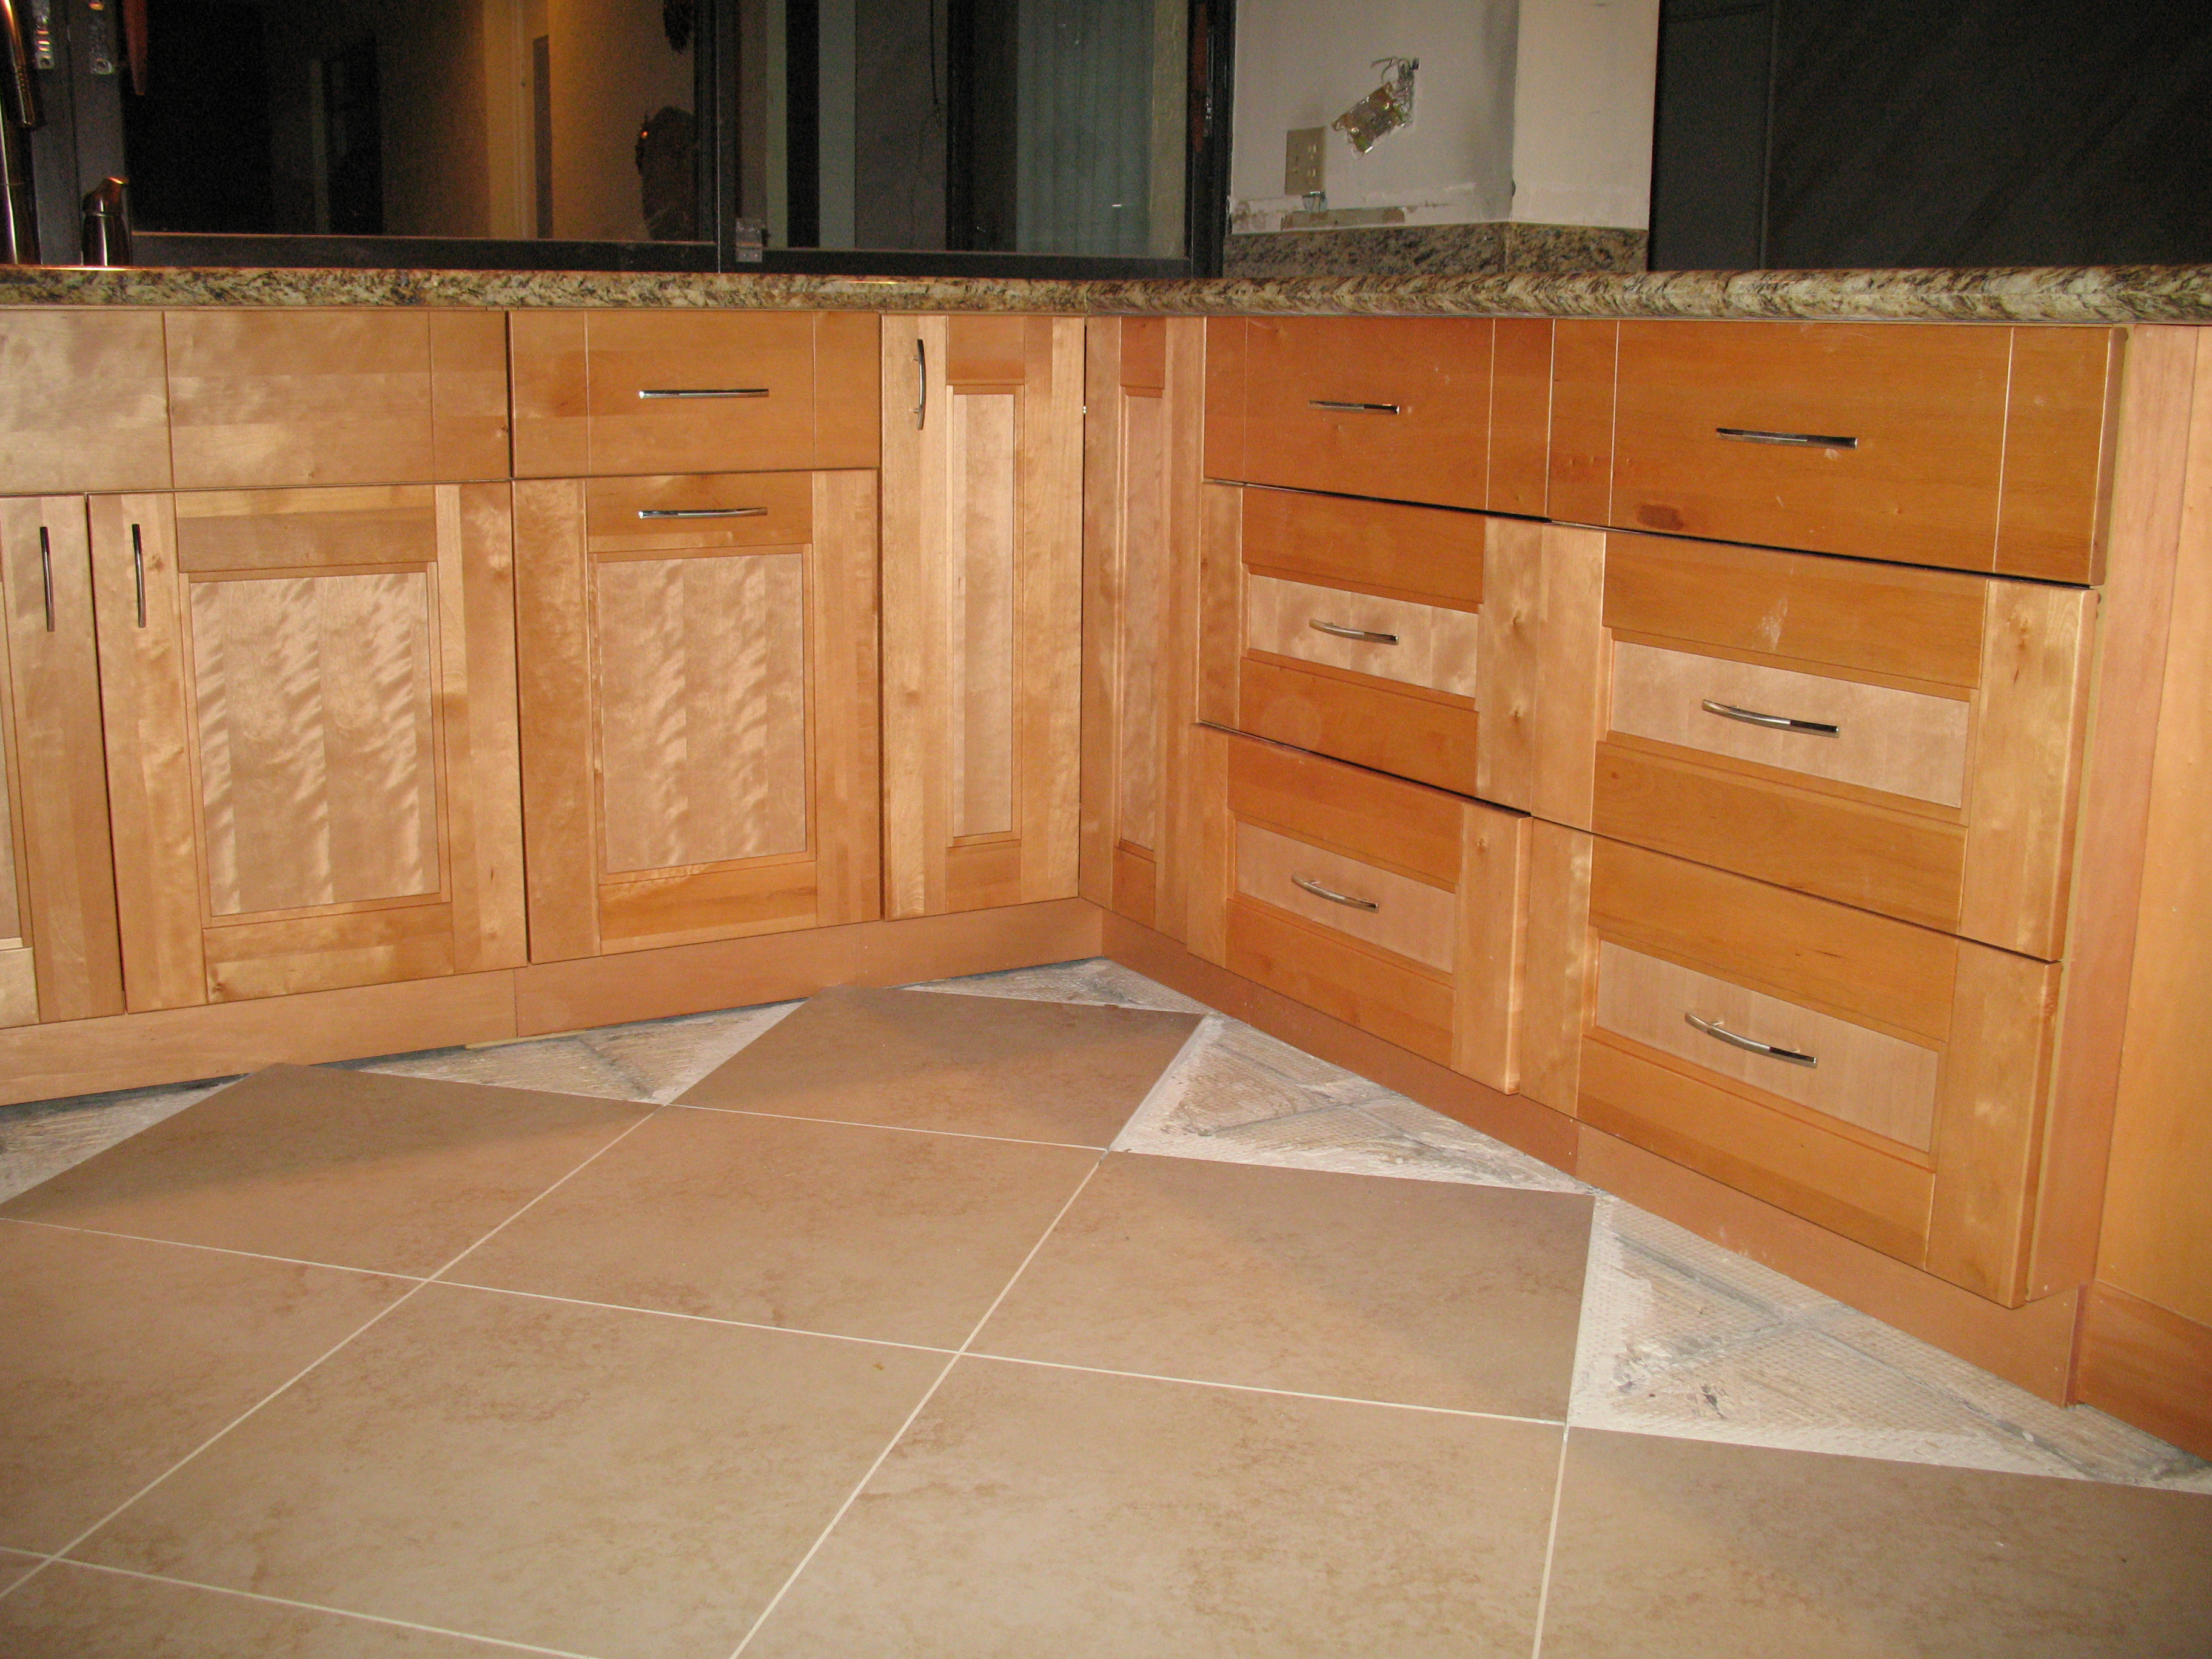 Gallery  Kitchen Cabinets and Granite Countertops 